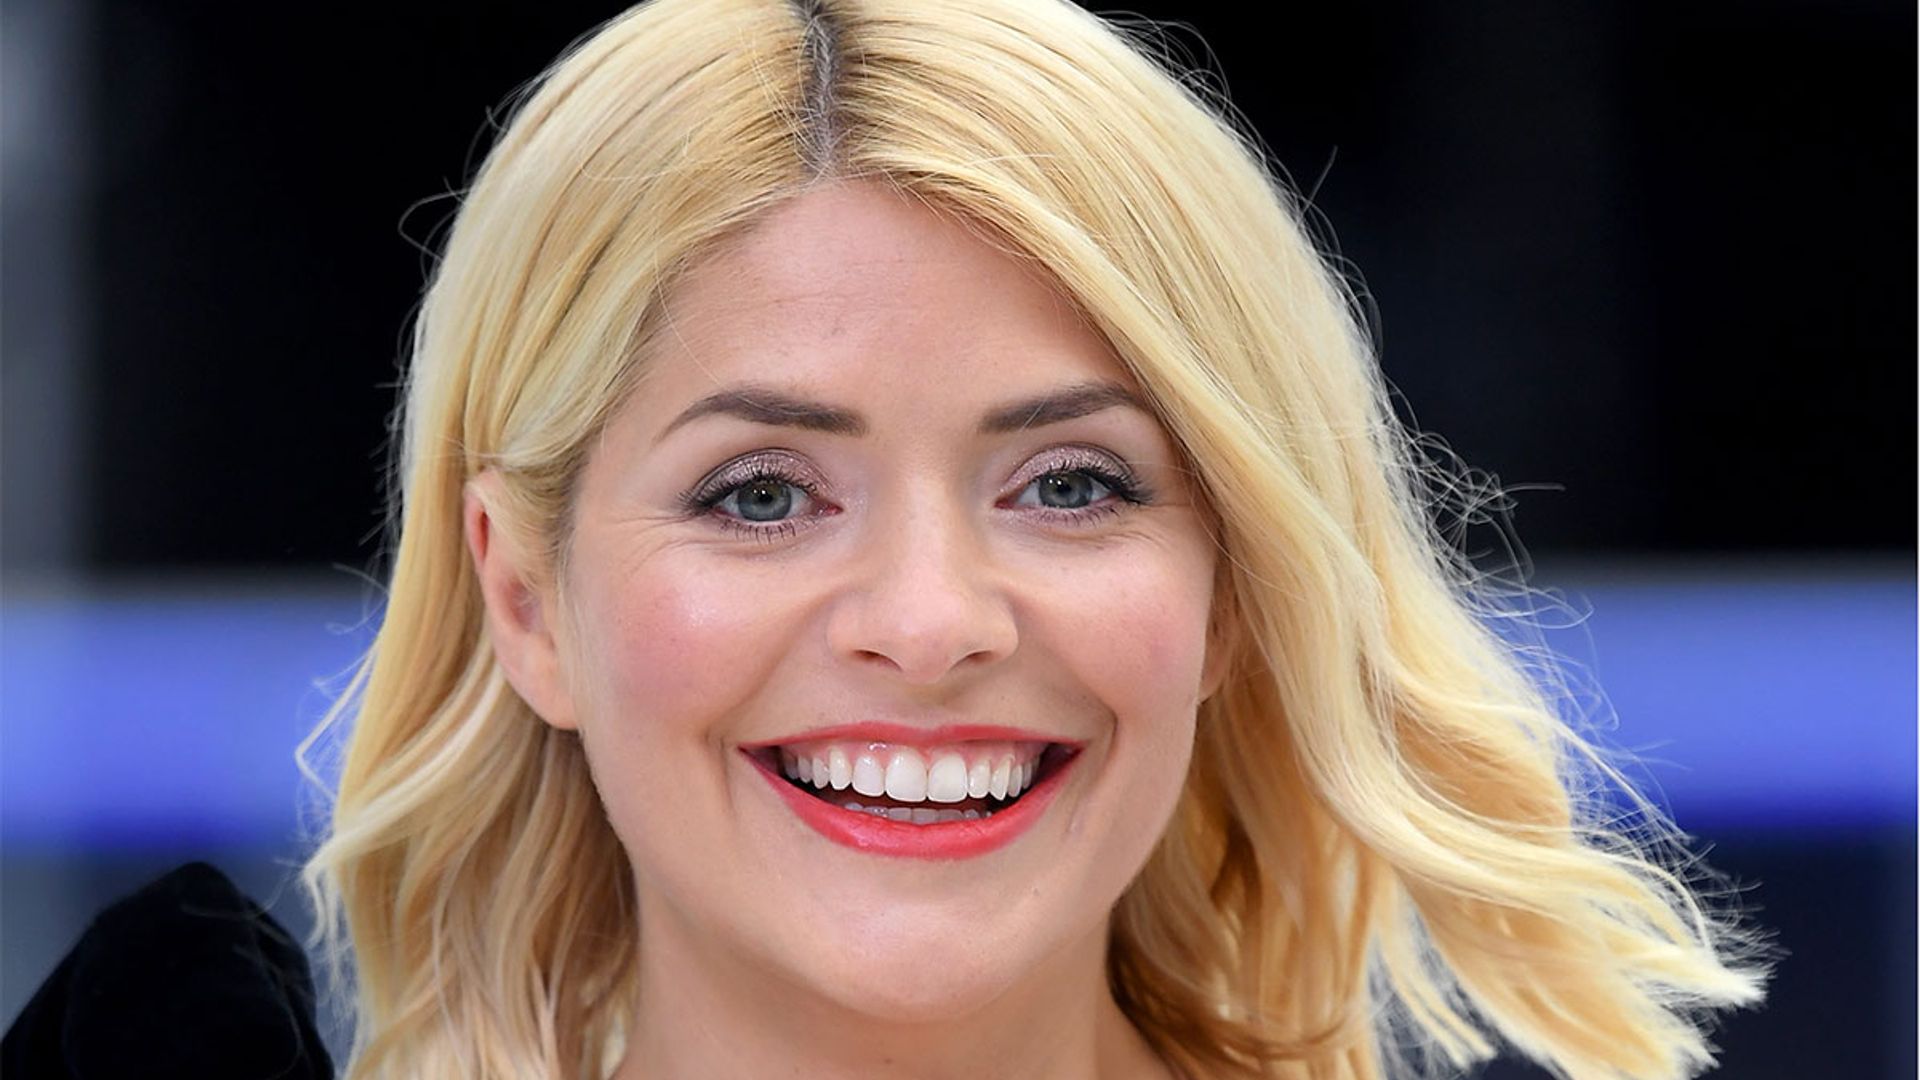 holly-willoughby-red-dress